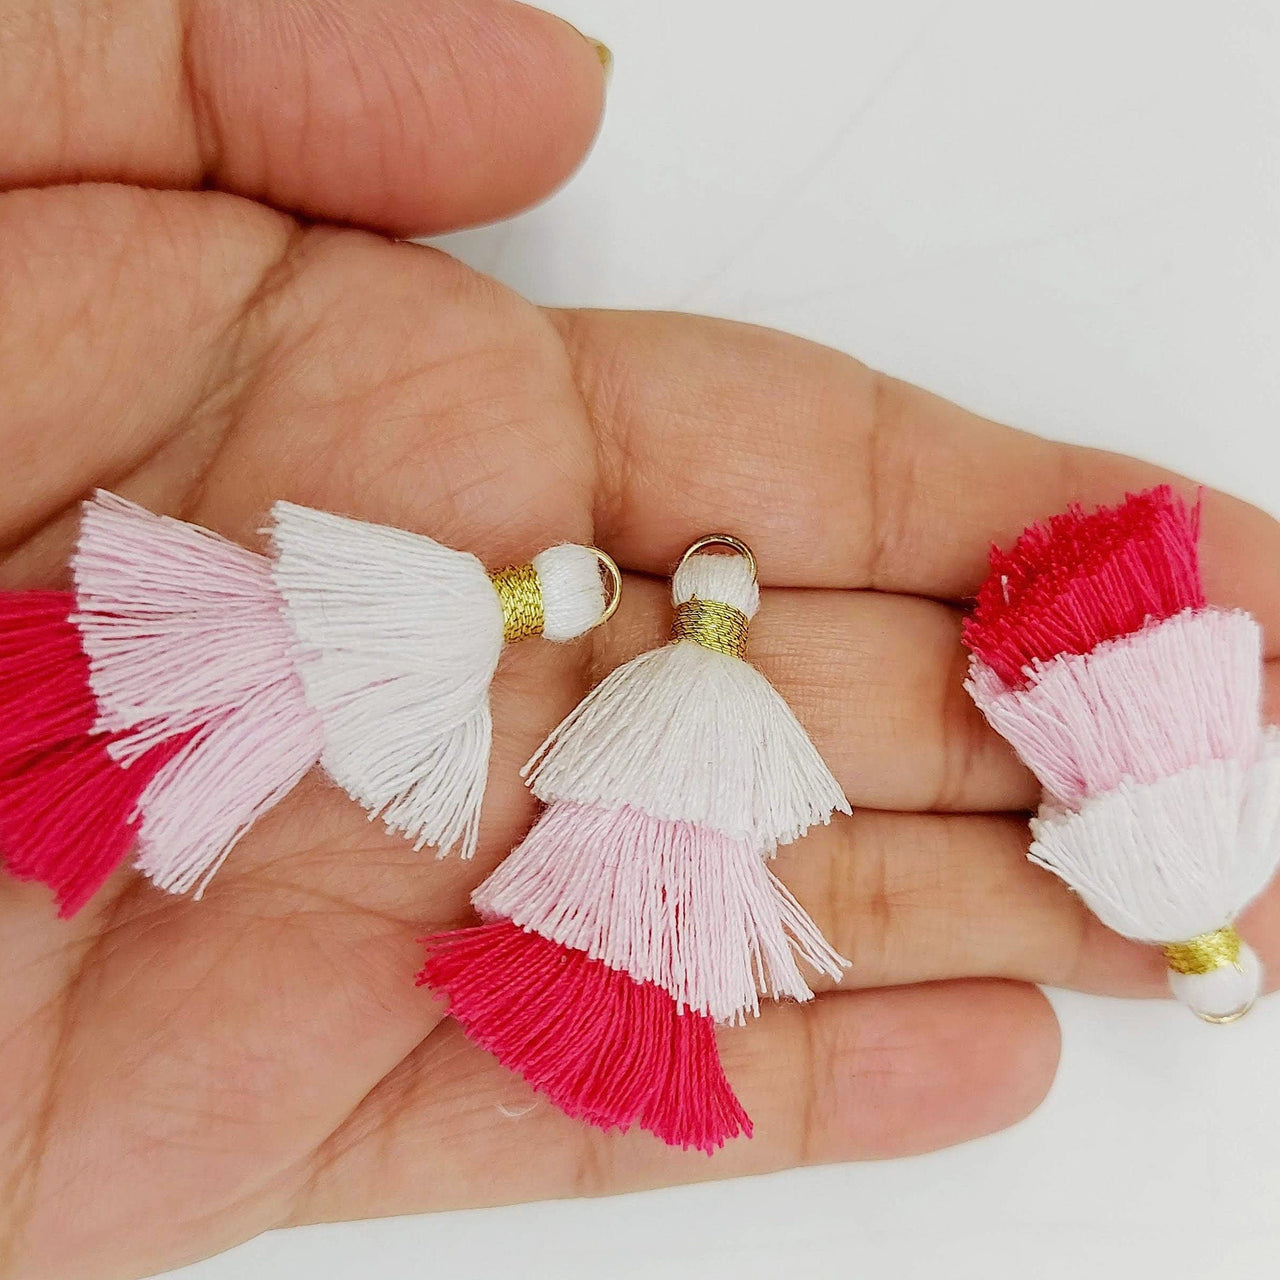 White,Pink and Cerise Pink Small Cotton Tassels in Three Layers With Gold Colour Brass Loop Ring, Tassel Charms x 5